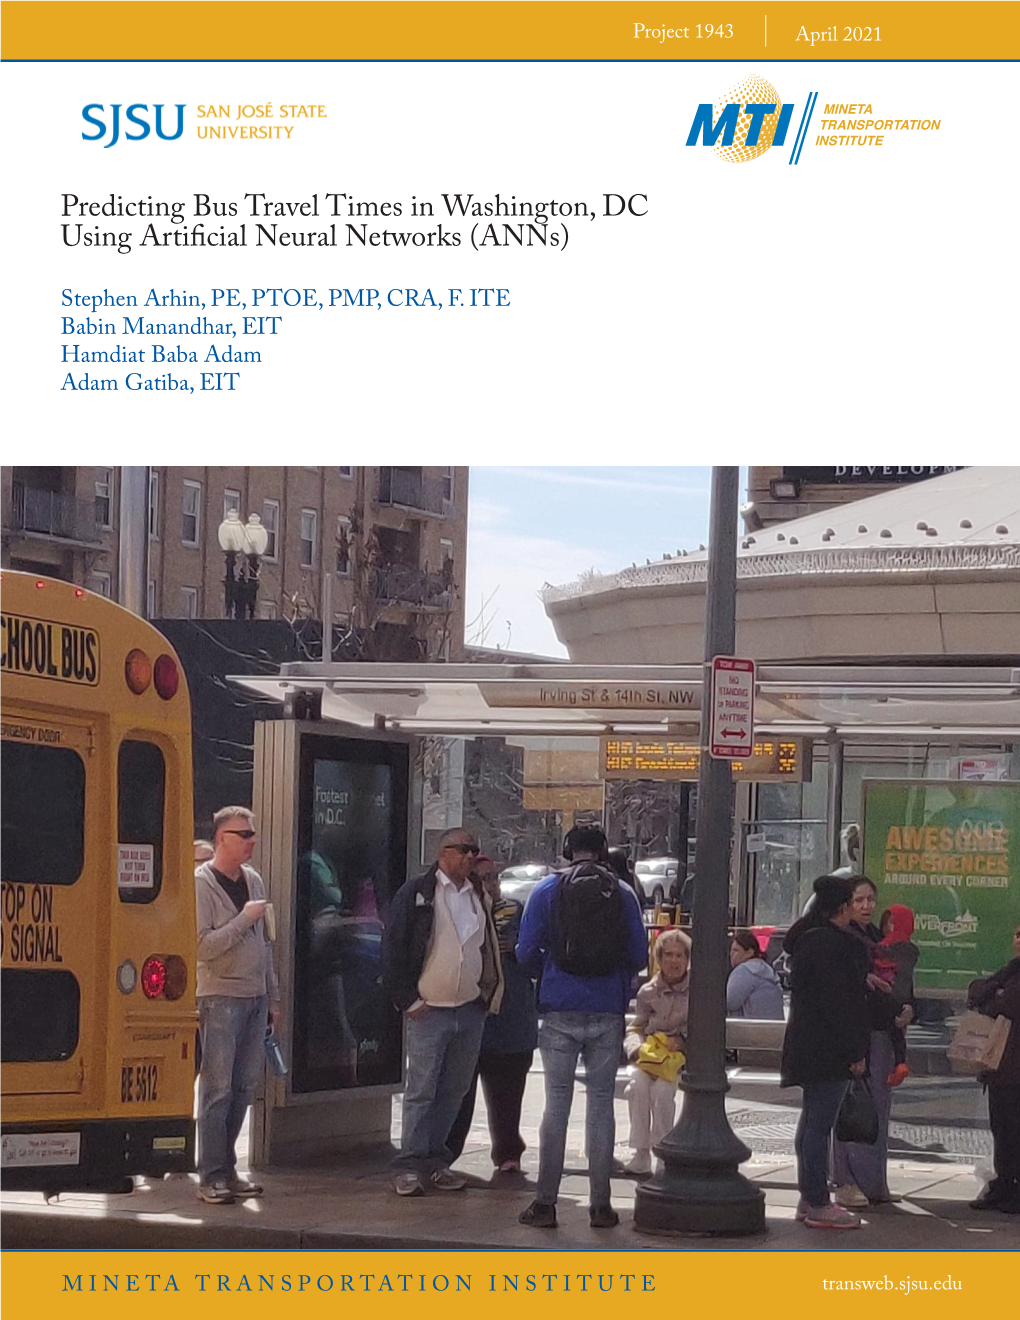 Predicting Bus Travel Times in Washington, DC Using Artificial Neural Networks (Anns)